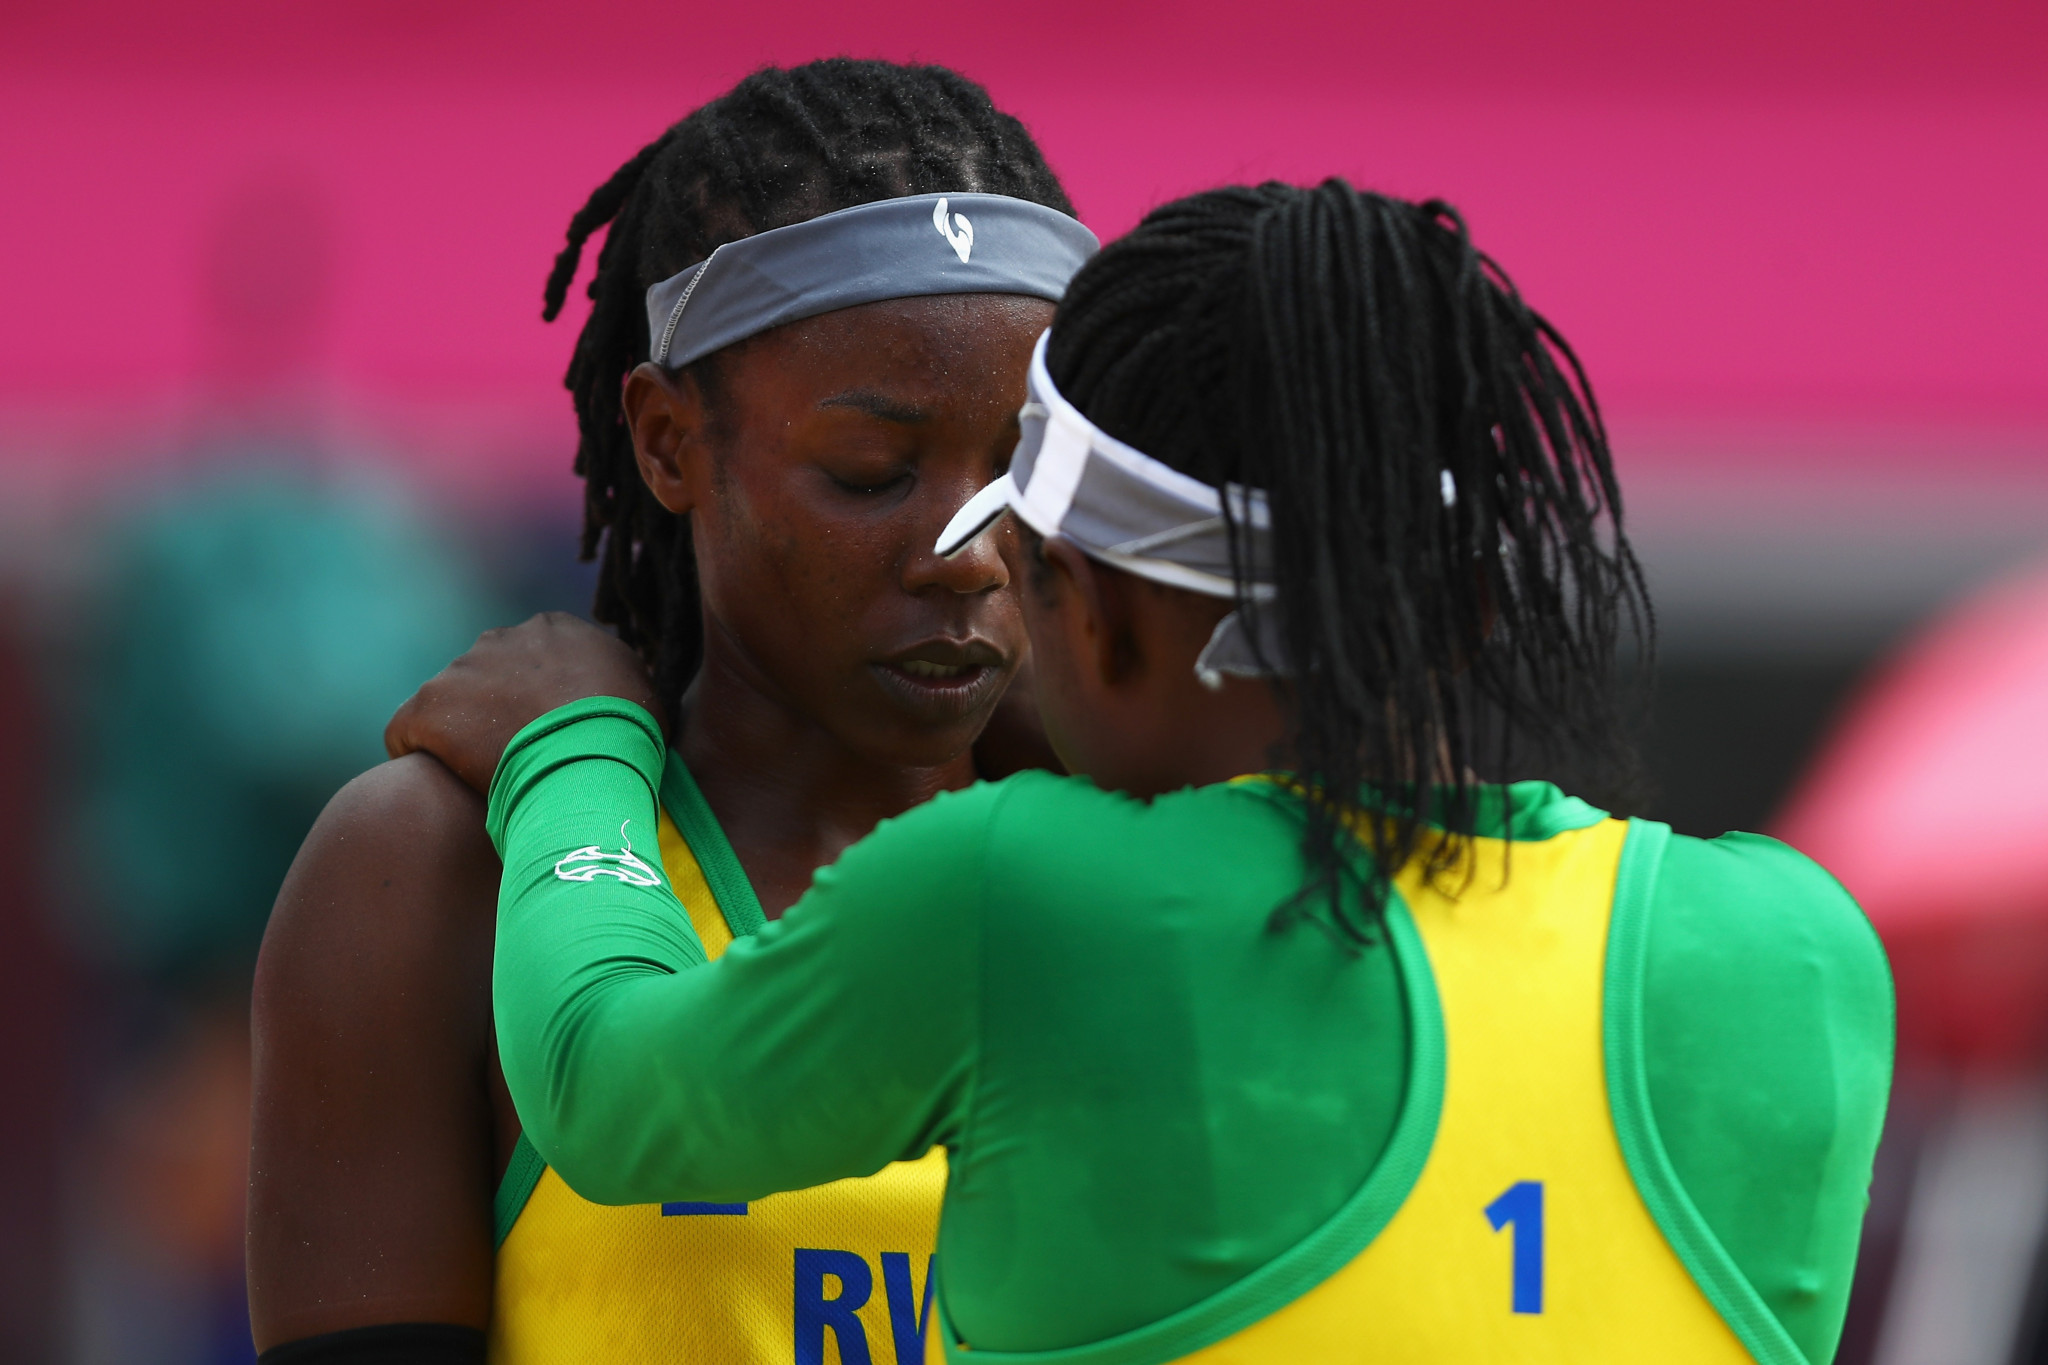 The anniversary of the start of the Rwandan genocide was marked on day three of the Gold Coast 2018 Commonwealth Games with a minute’s silence taking place at a beach volleyball match featuring the country’s athletes ©Getty Images